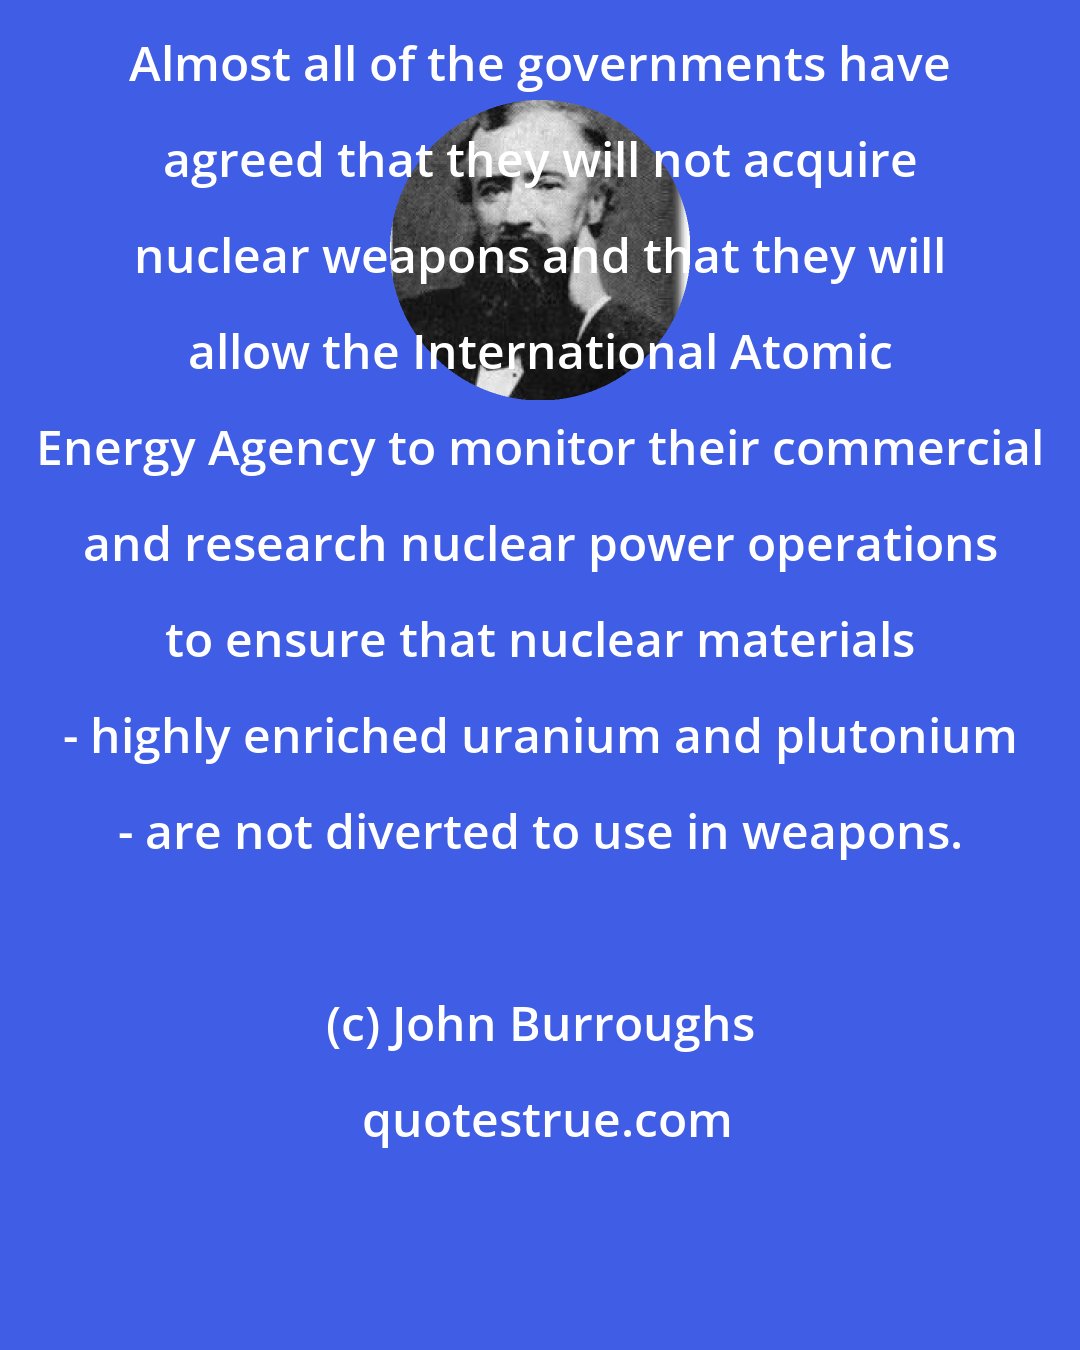 John Burroughs: Almost all of the governments have agreed that they will not acquire nuclear weapons and that they will allow the International Atomic Energy Agency to monitor their commercial and research nuclear power operations to ensure that nuclear materials - highly enriched uranium and plutonium - are not diverted to use in weapons.